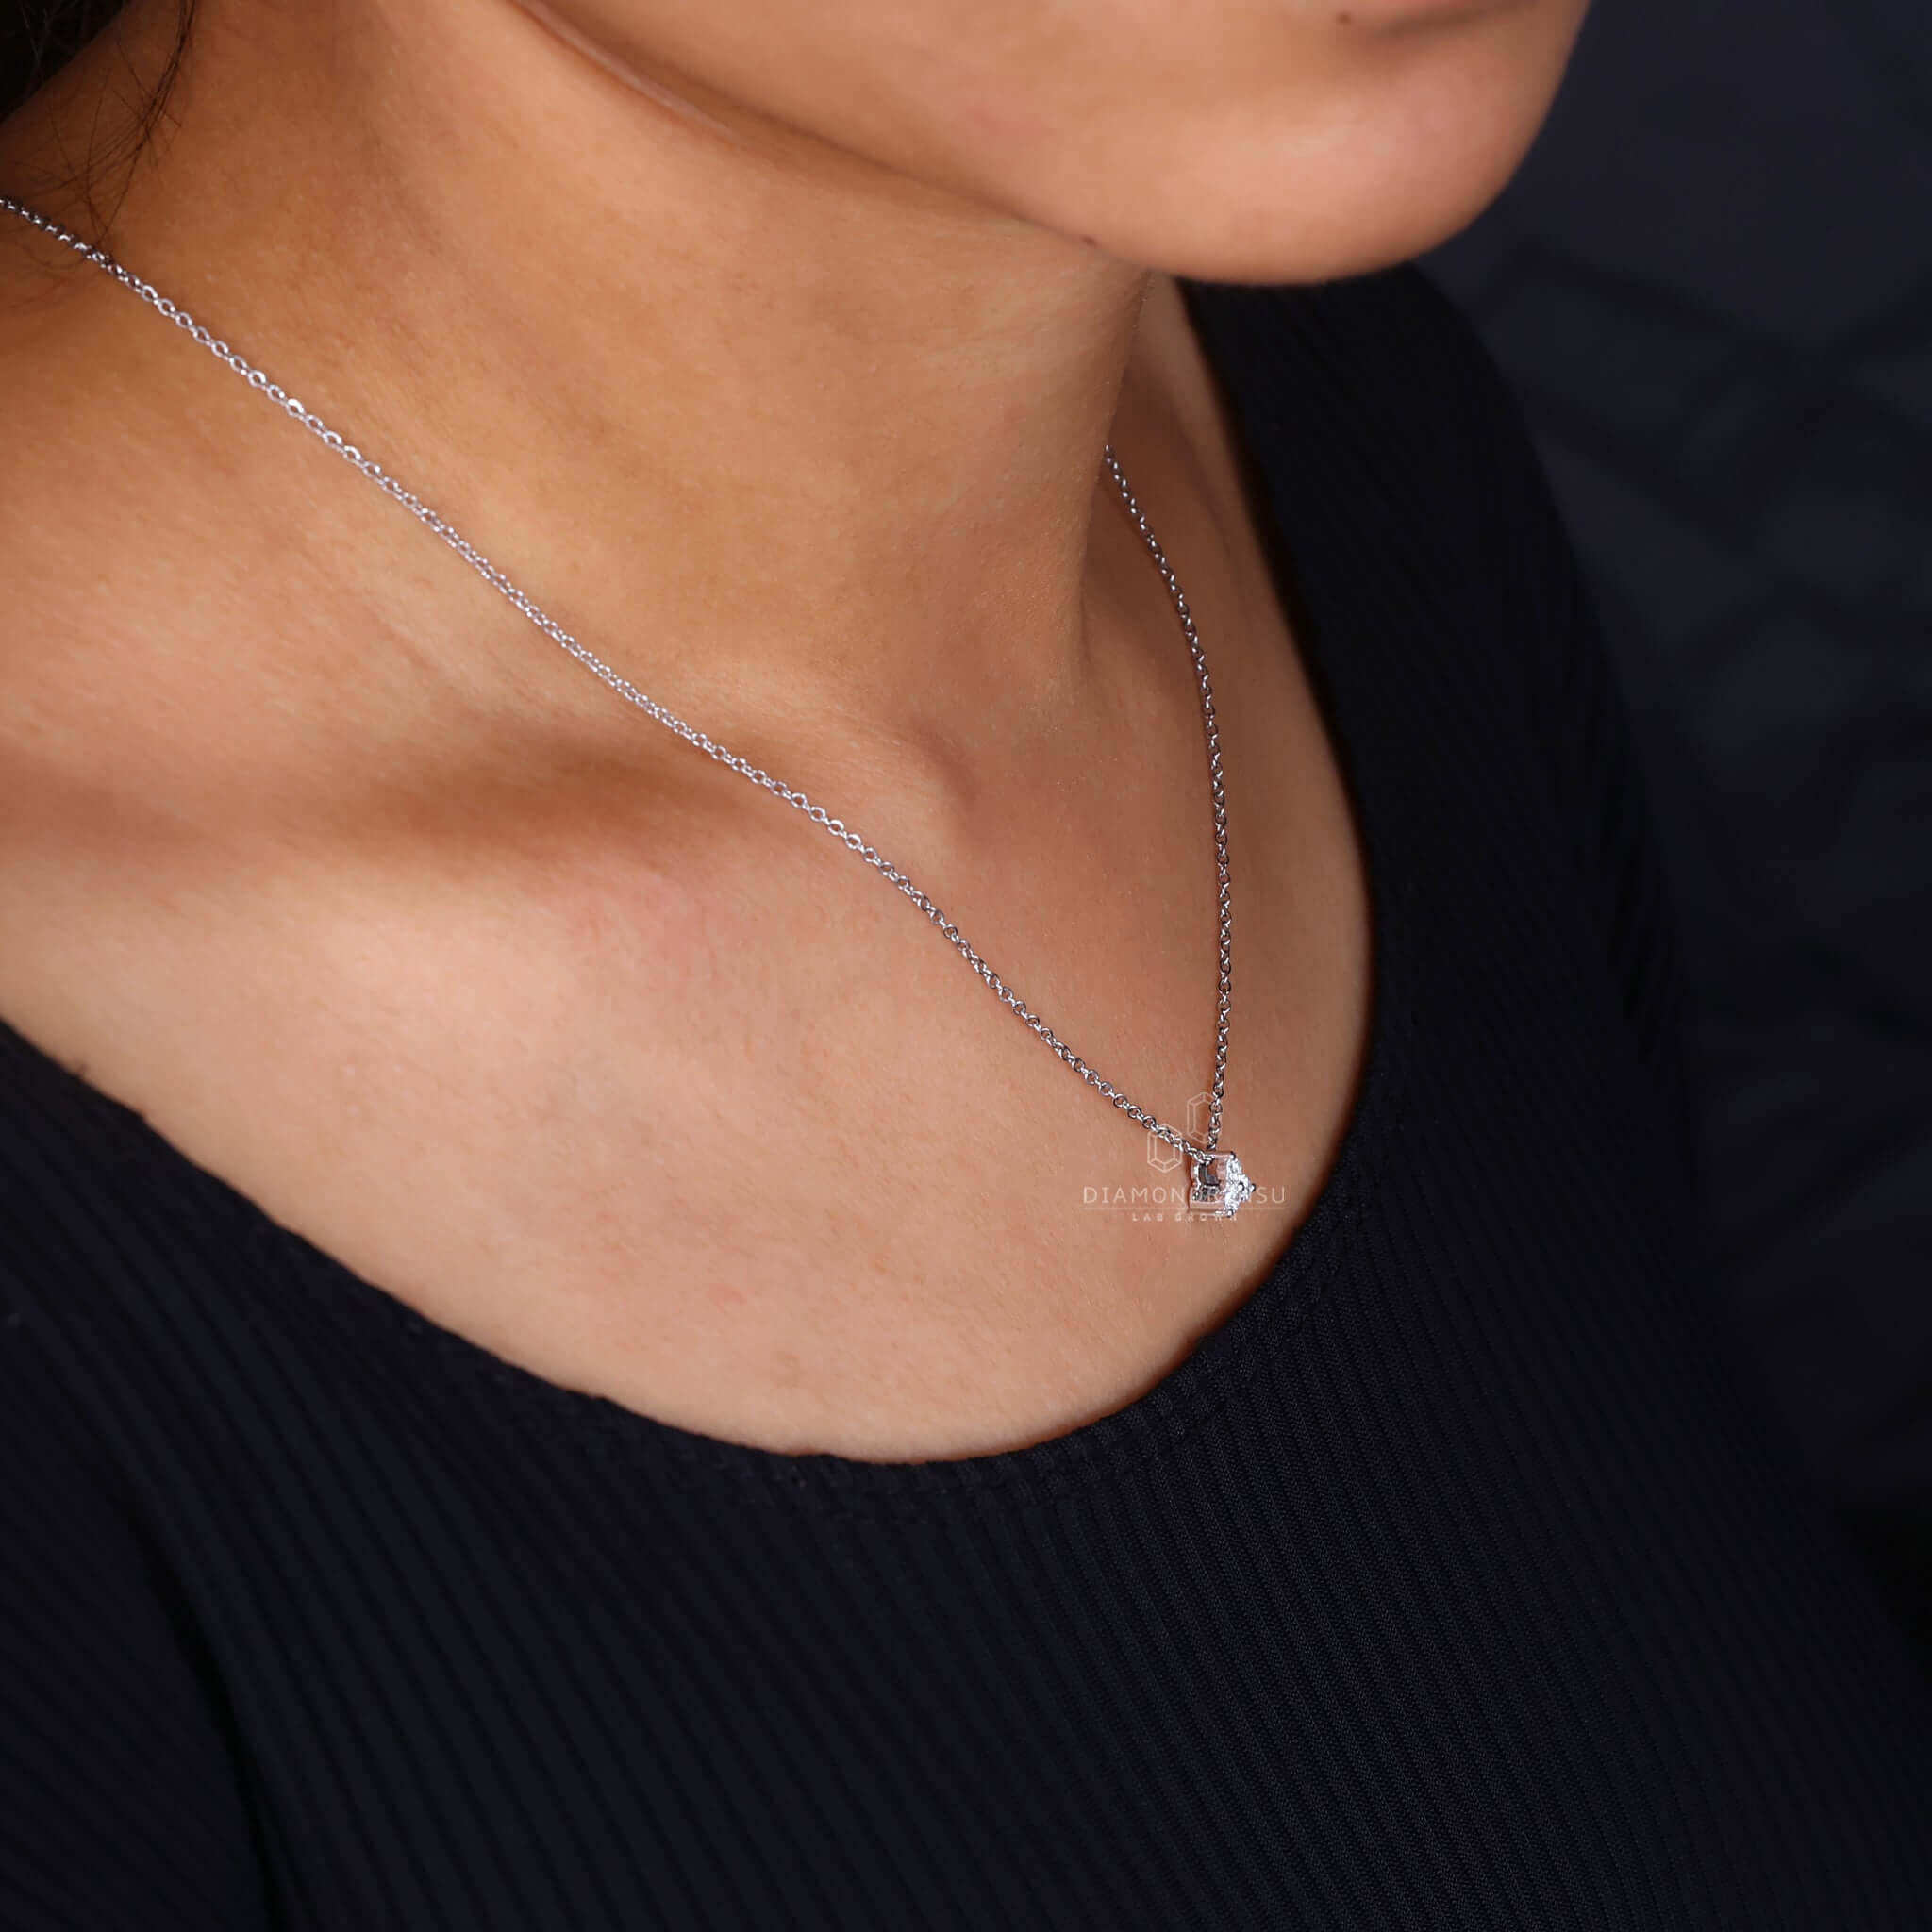 Close view on hand, featuring a diamond pendant for women, reflecting sophistication and style.